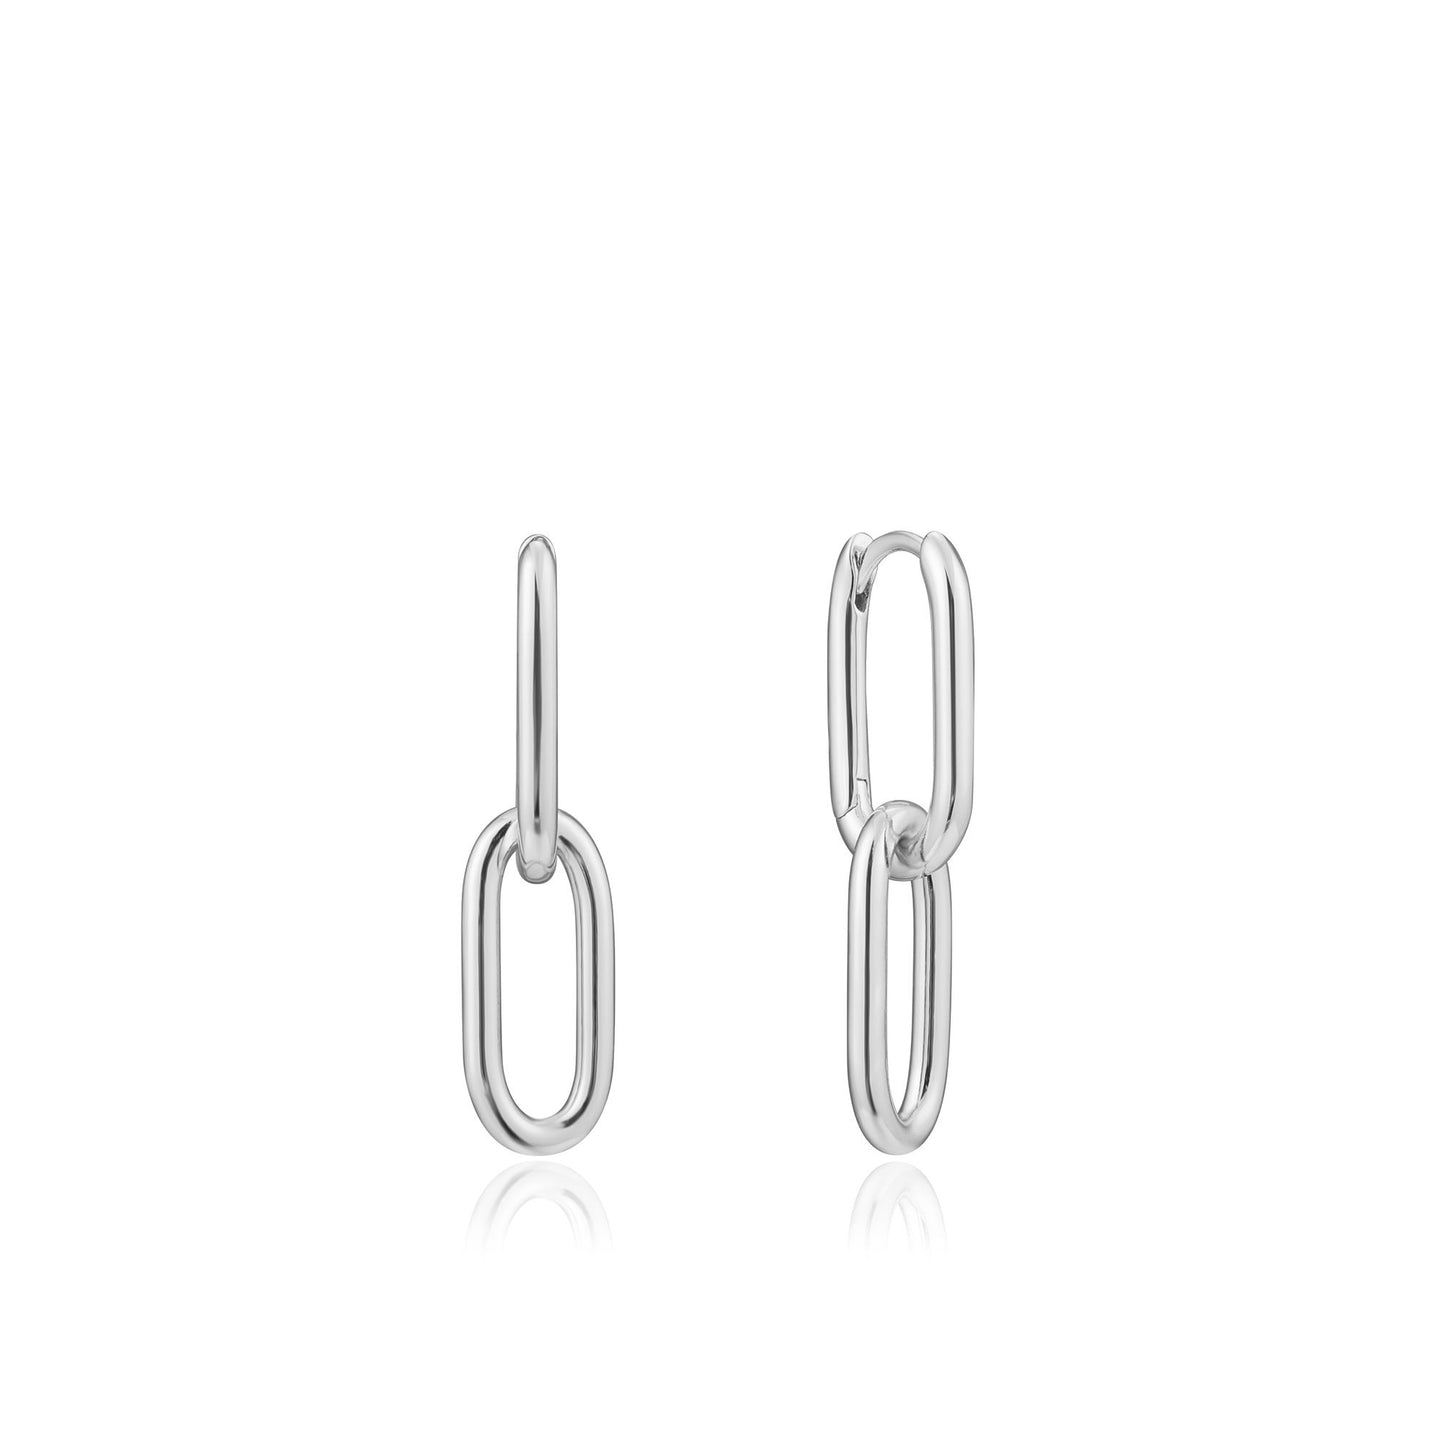 ANIA HAIE ANIA HAIE - Silver Cable Link Earrings available at The Good Life Boutique